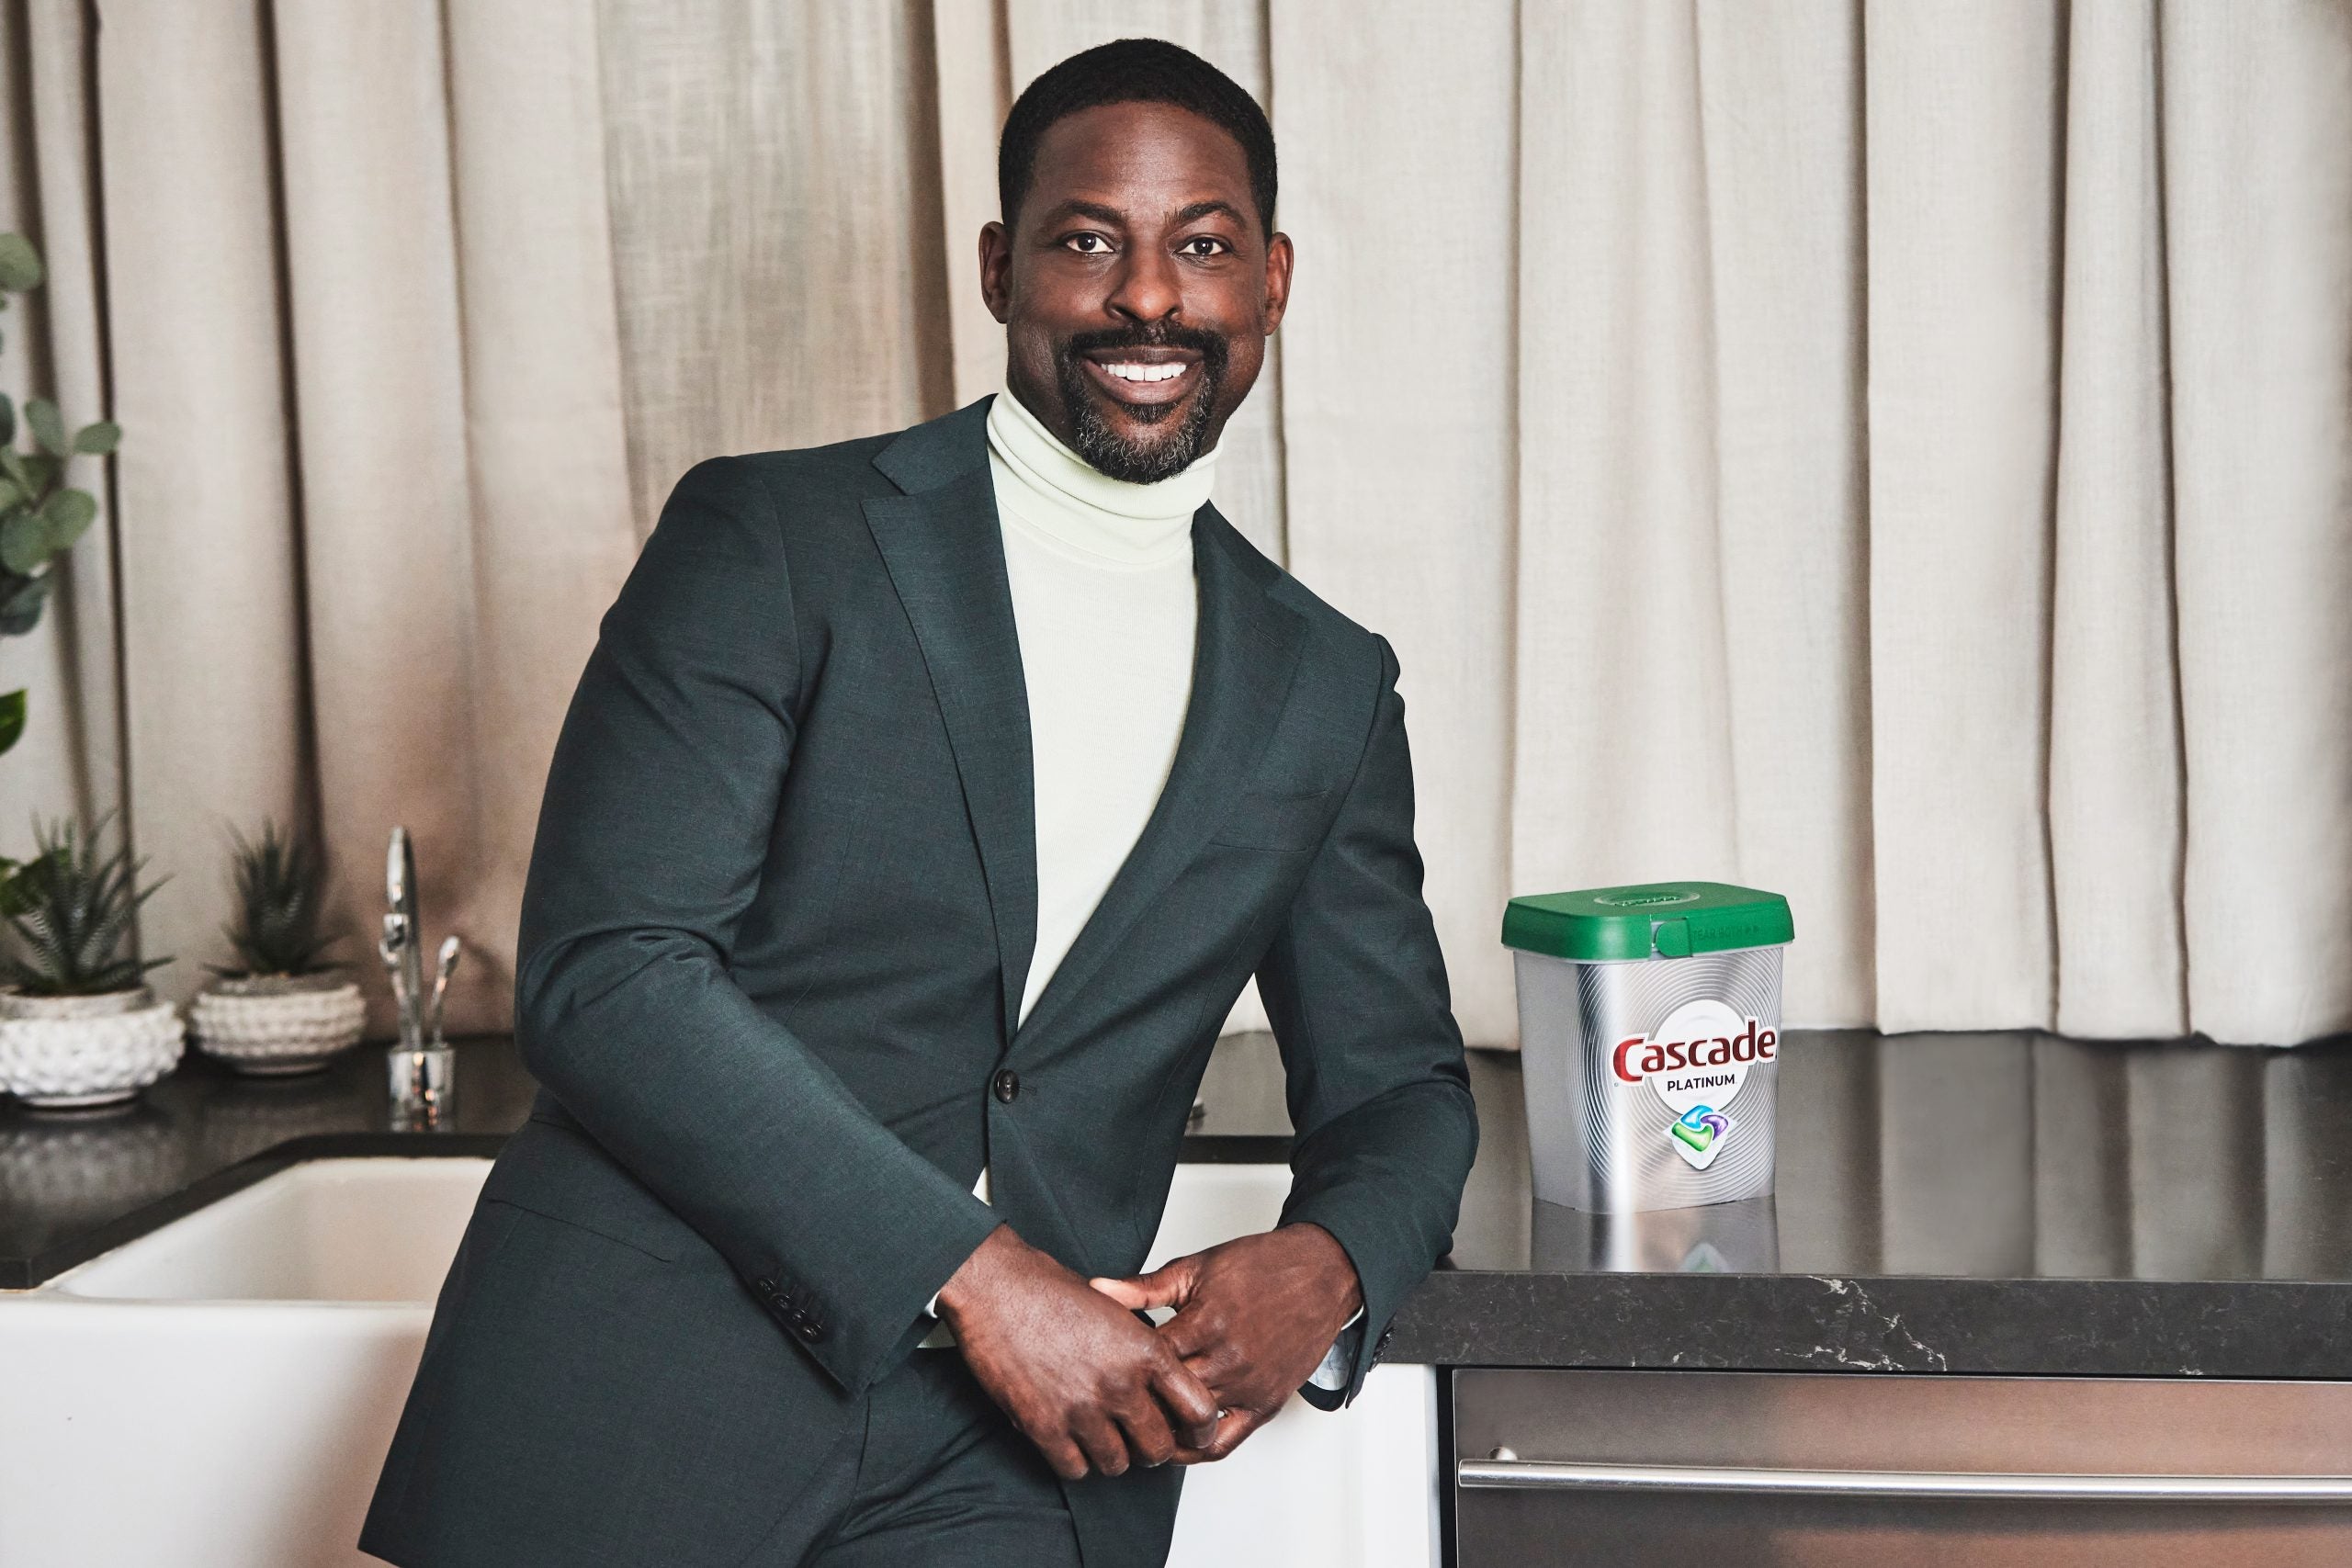 Sterling K. Brown On 'This Is Us' Ending and Shifting The Narrative About Black Fatherhood